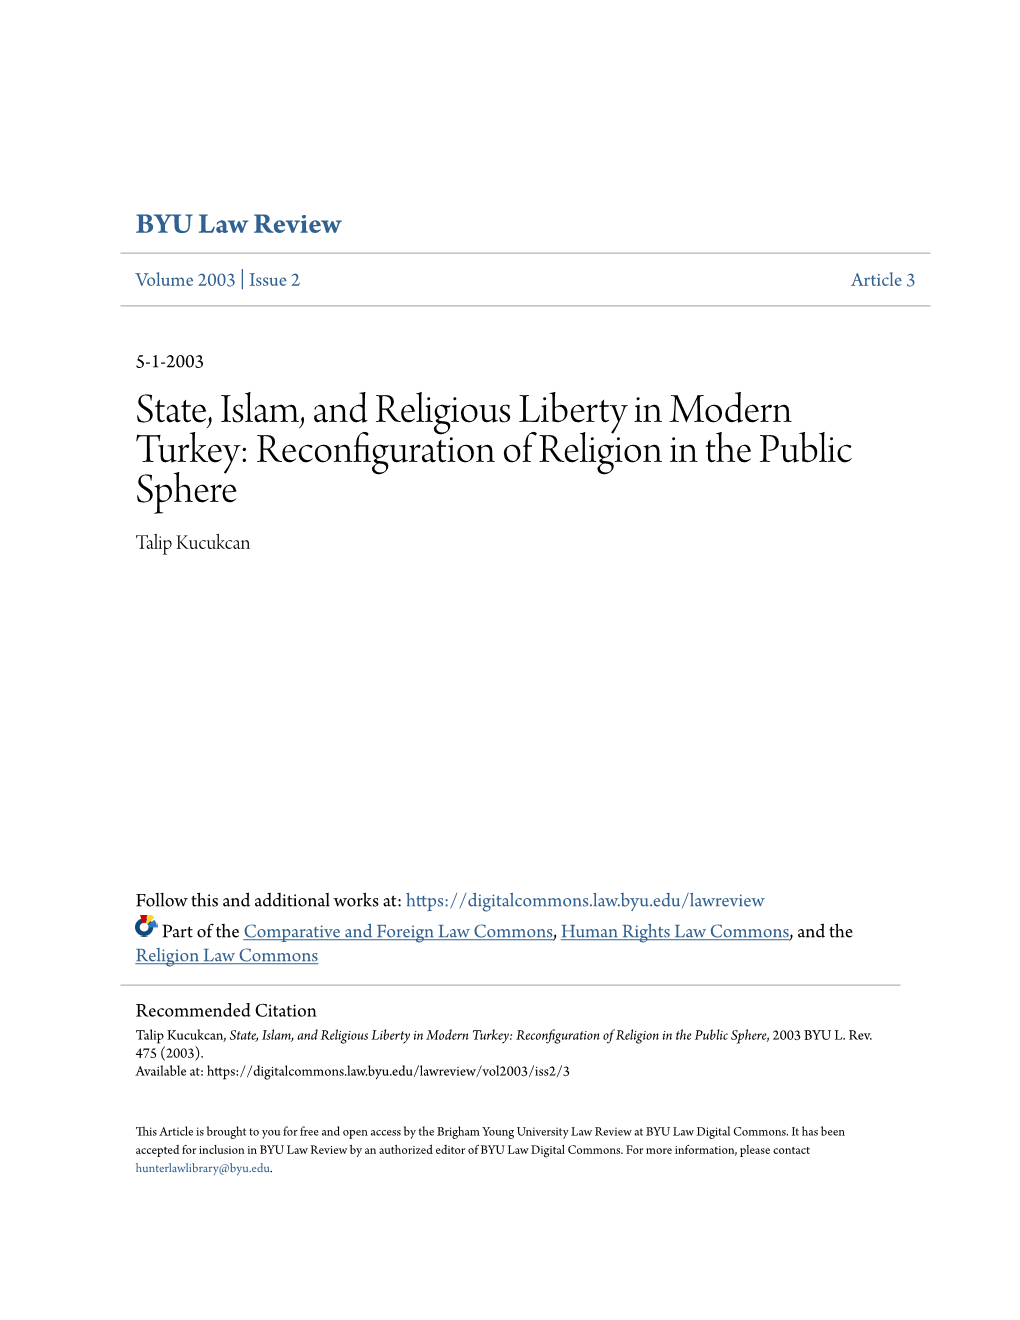 State, Islam, and Religious Liberty in Modern Turkey: Reconfiguration of Religion in the Public Sphere Talip Kucukcan